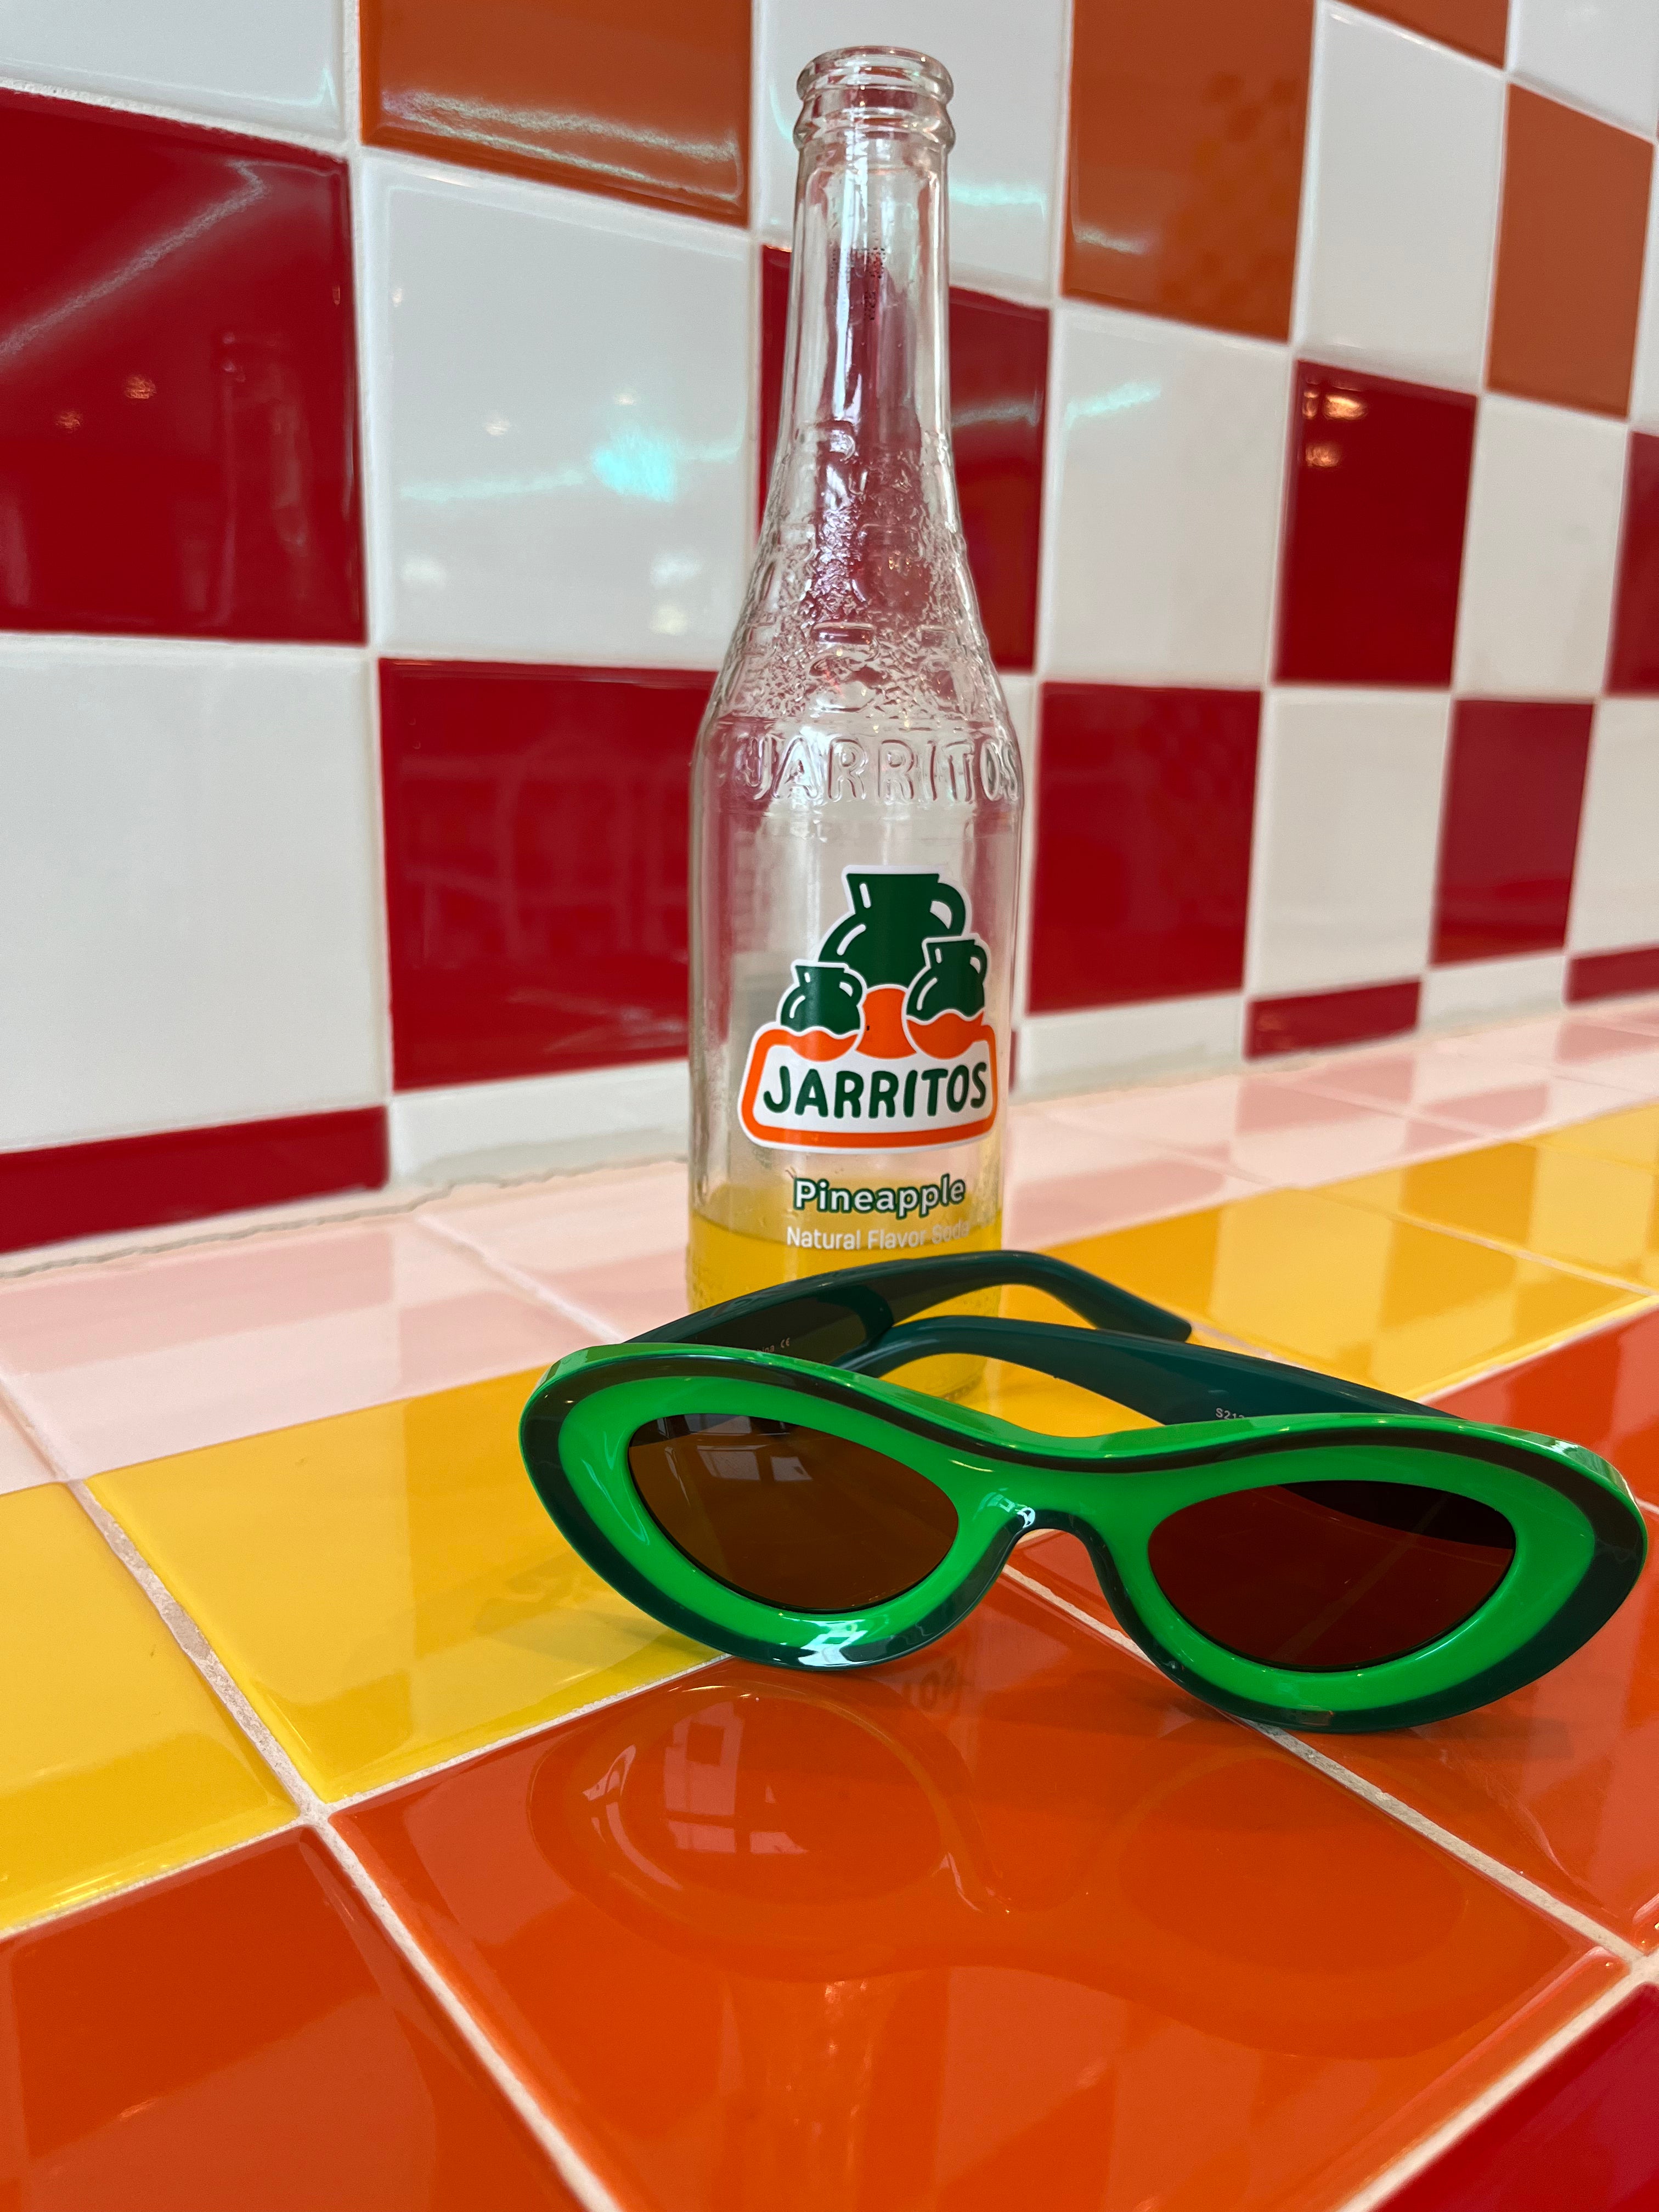 Green sunglasses next to a Jarritos bottle